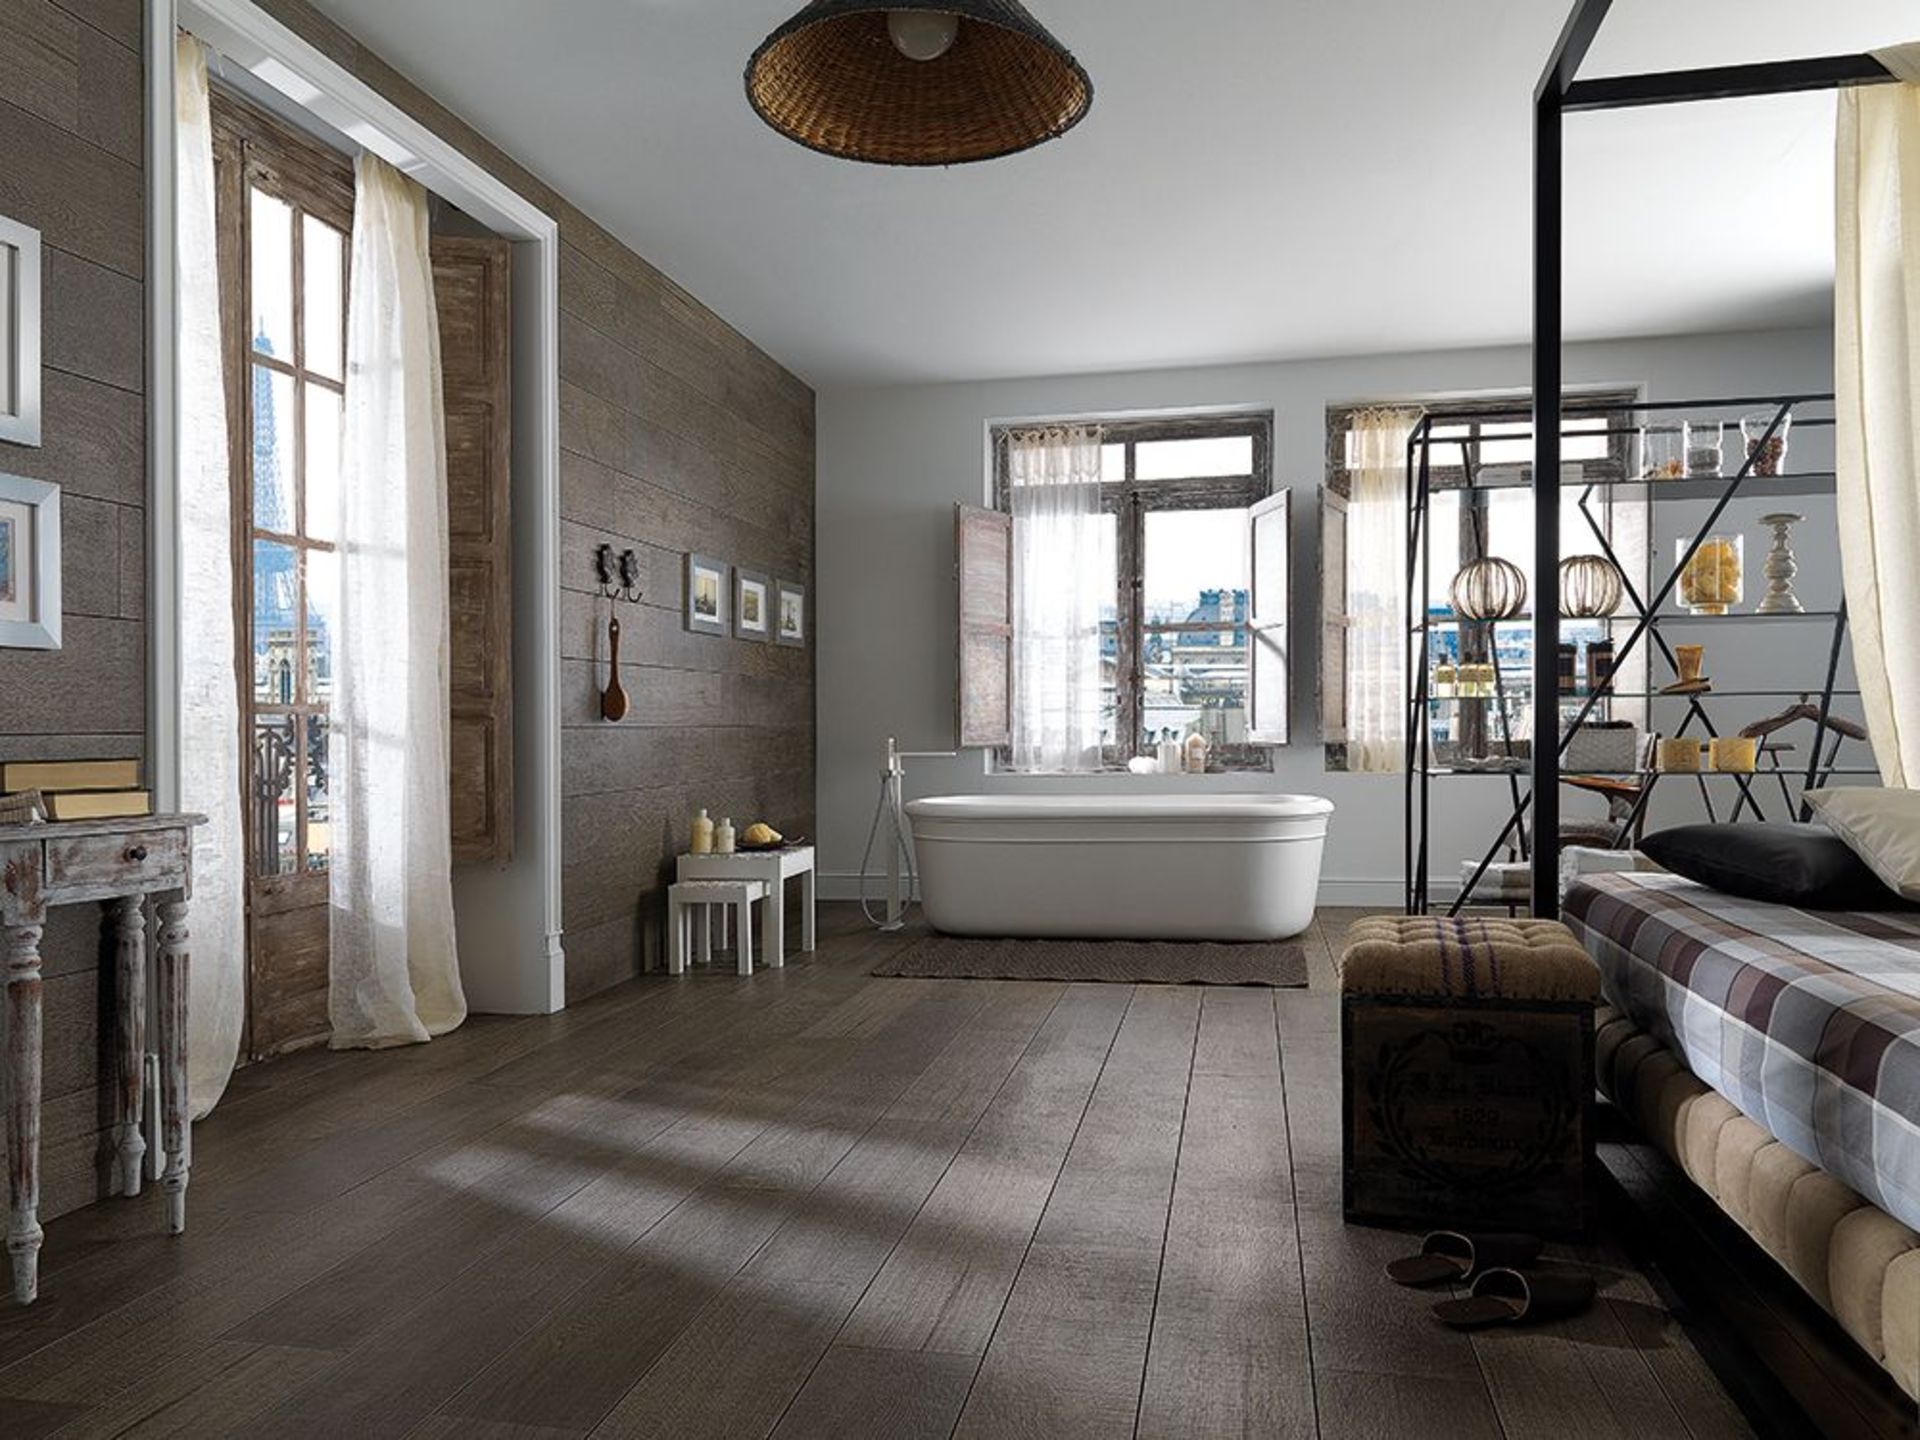 10.68 Square Meters of Porcelanosa Zoc Oxford Anthracite Wall and Floor Tiles. 10X44.3cm per tile.